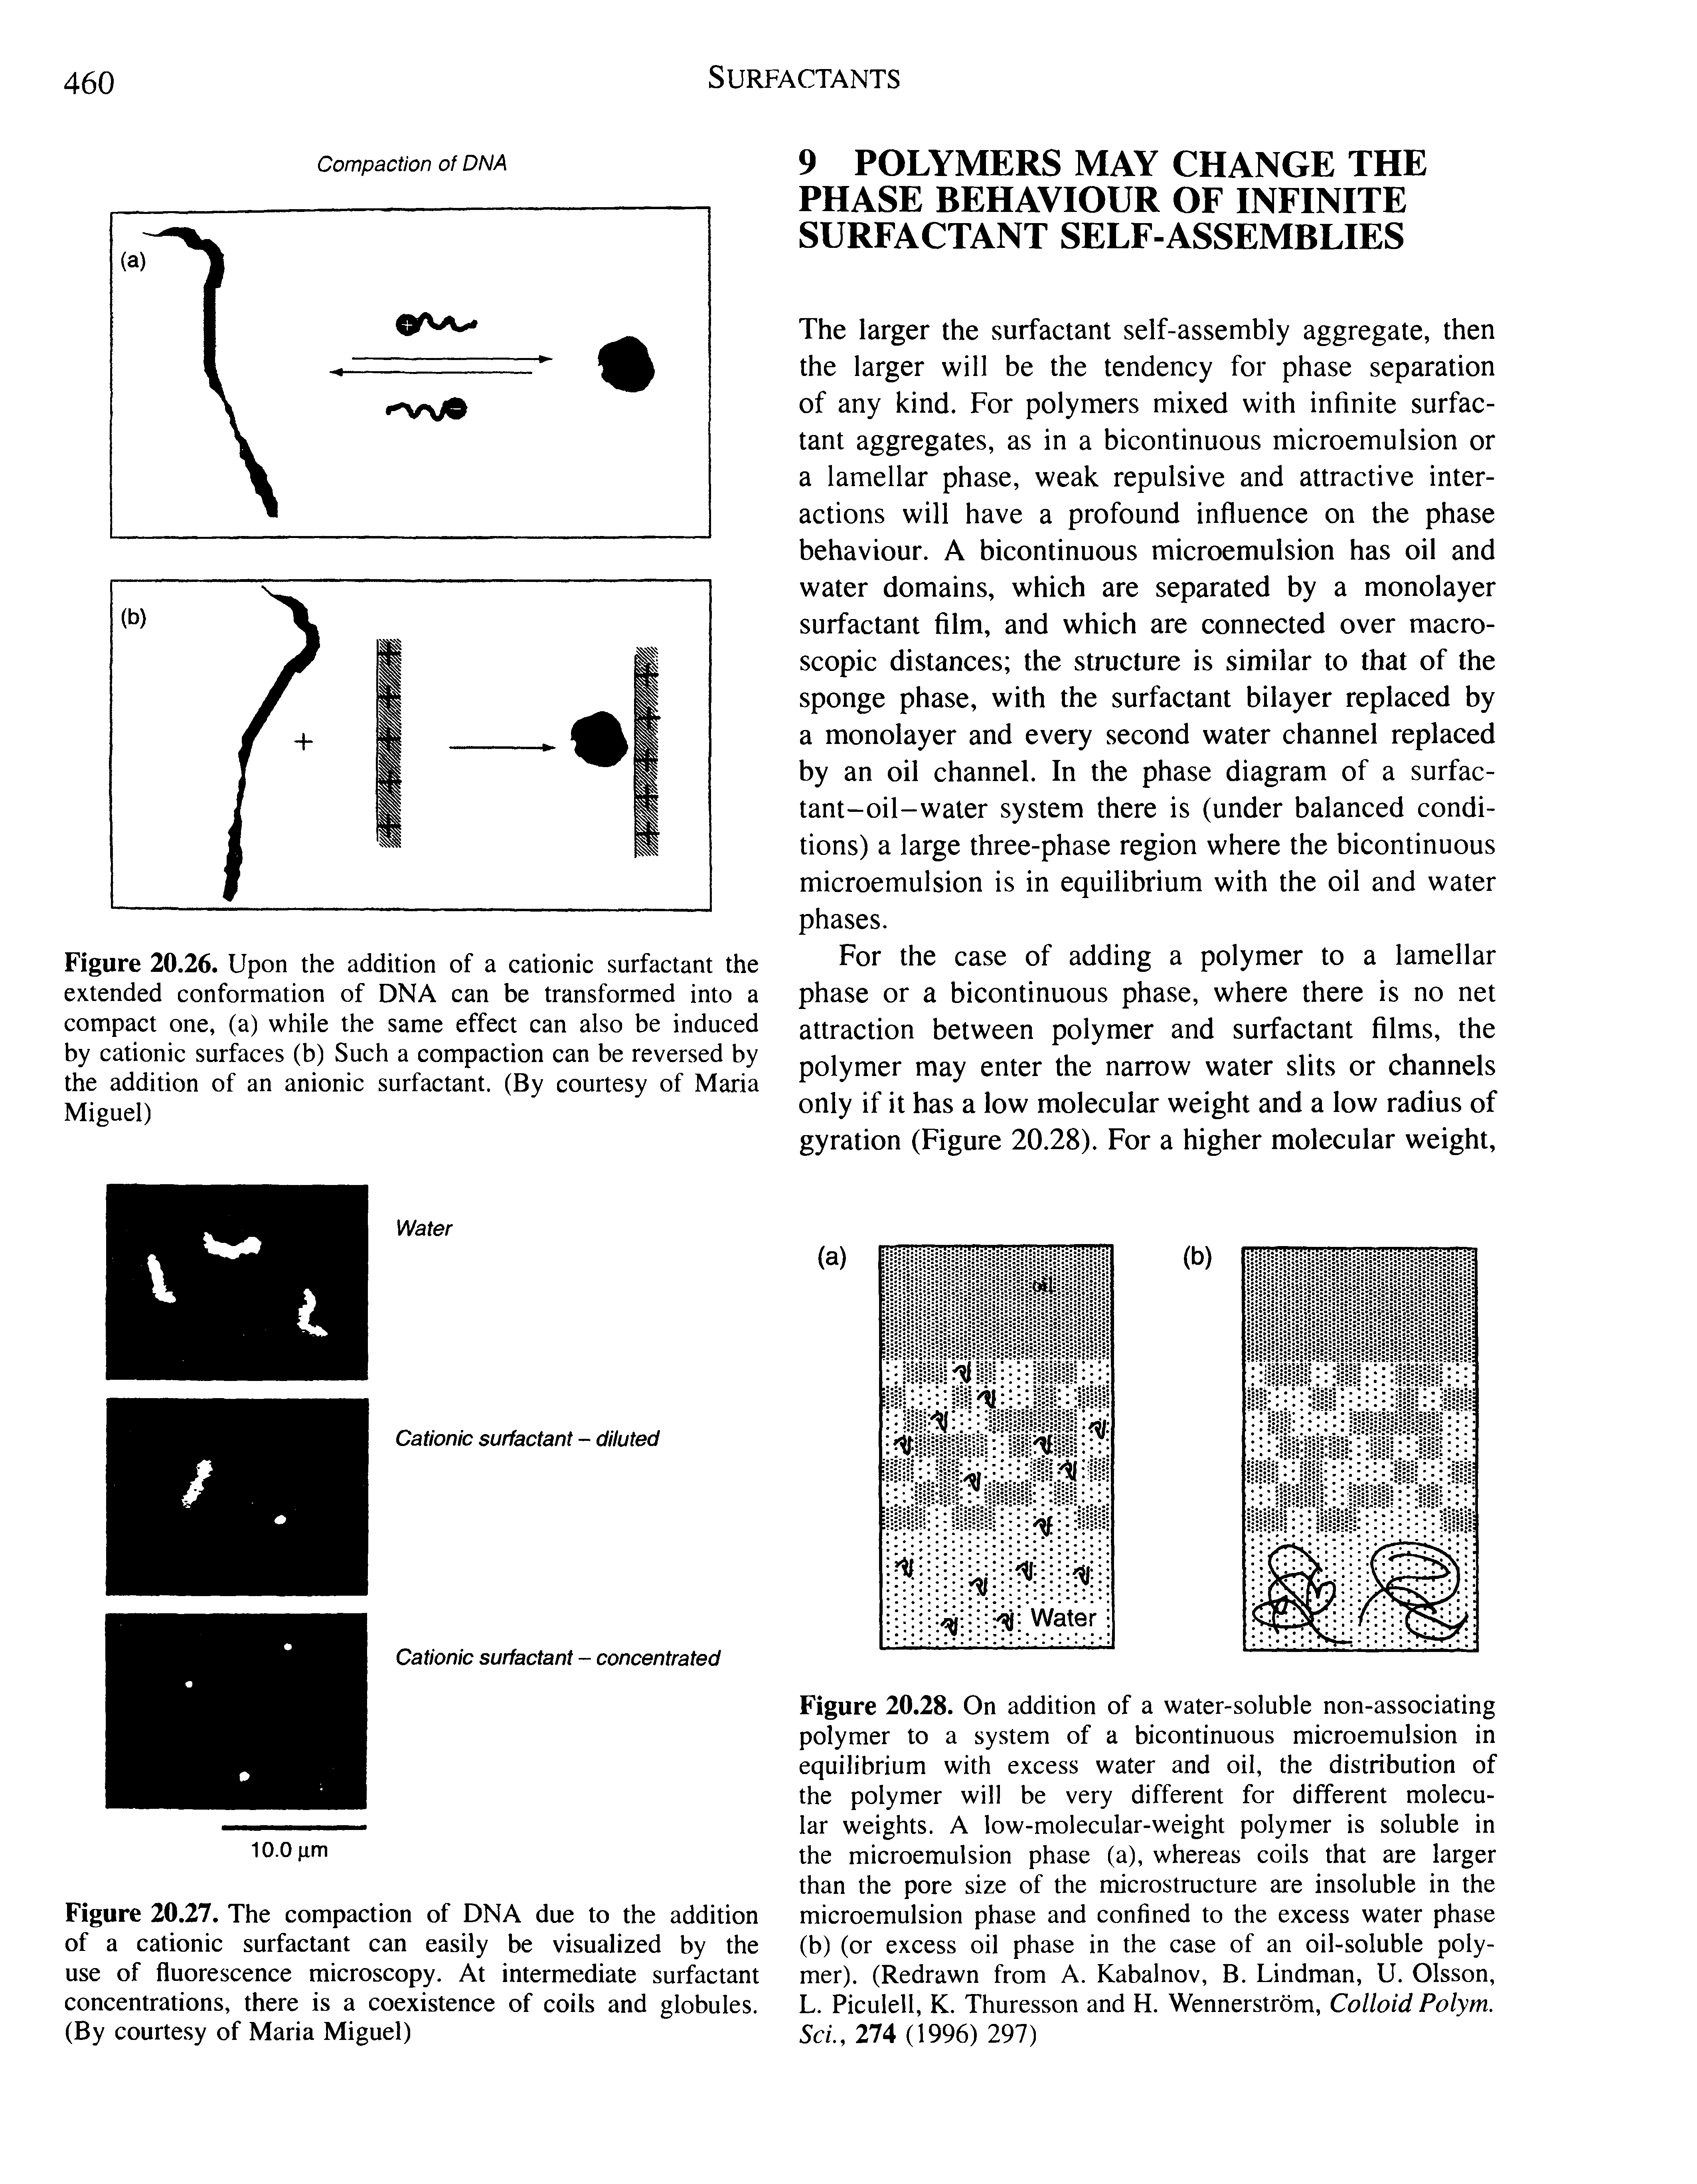 Figure 20.28. On addition of a water-soluble non-associating polymer to a system of a bicontinuous microemulsion in equilibrium with excess water and oil, the distribution of the polymer will be very different for different molecular weights. A low-molecular-weight polymer is soluble in the microemulsion phase (a), whereas coils that are larger than the pore size of the microstructure are insoluble in the microemulsion phase and confined to the excess water phase (b) (or excess oil phase in the case of an oil-soluble polymer). (Redrawn from A. Kabalnov, B. Lindman, U. Olsson, L. Piculell, K. Thuresson and H. Wennerstrom, Colloid Polym. ScL, 274 (1996) 297)...